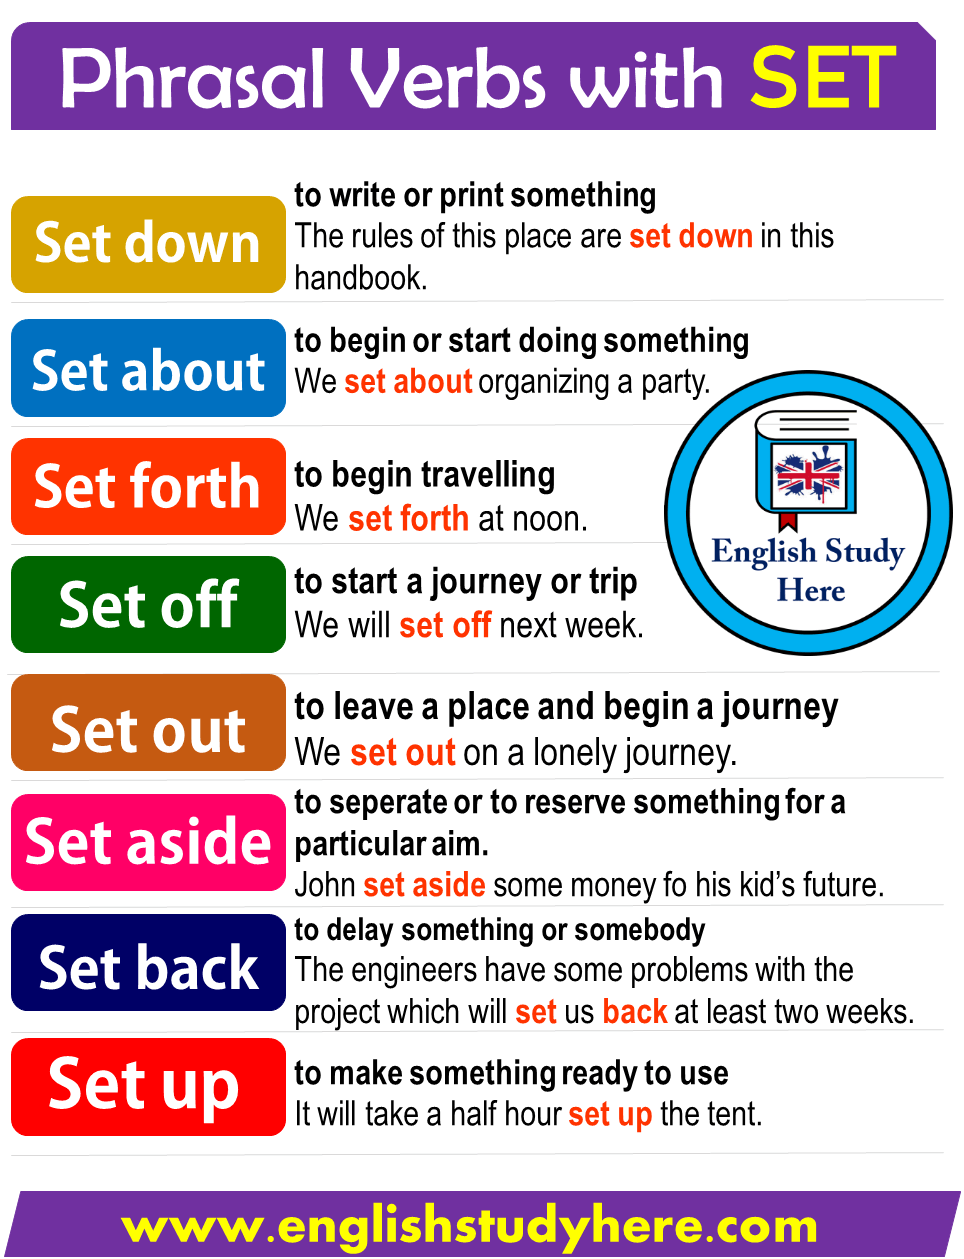 Phrasal Verbs with SET in English